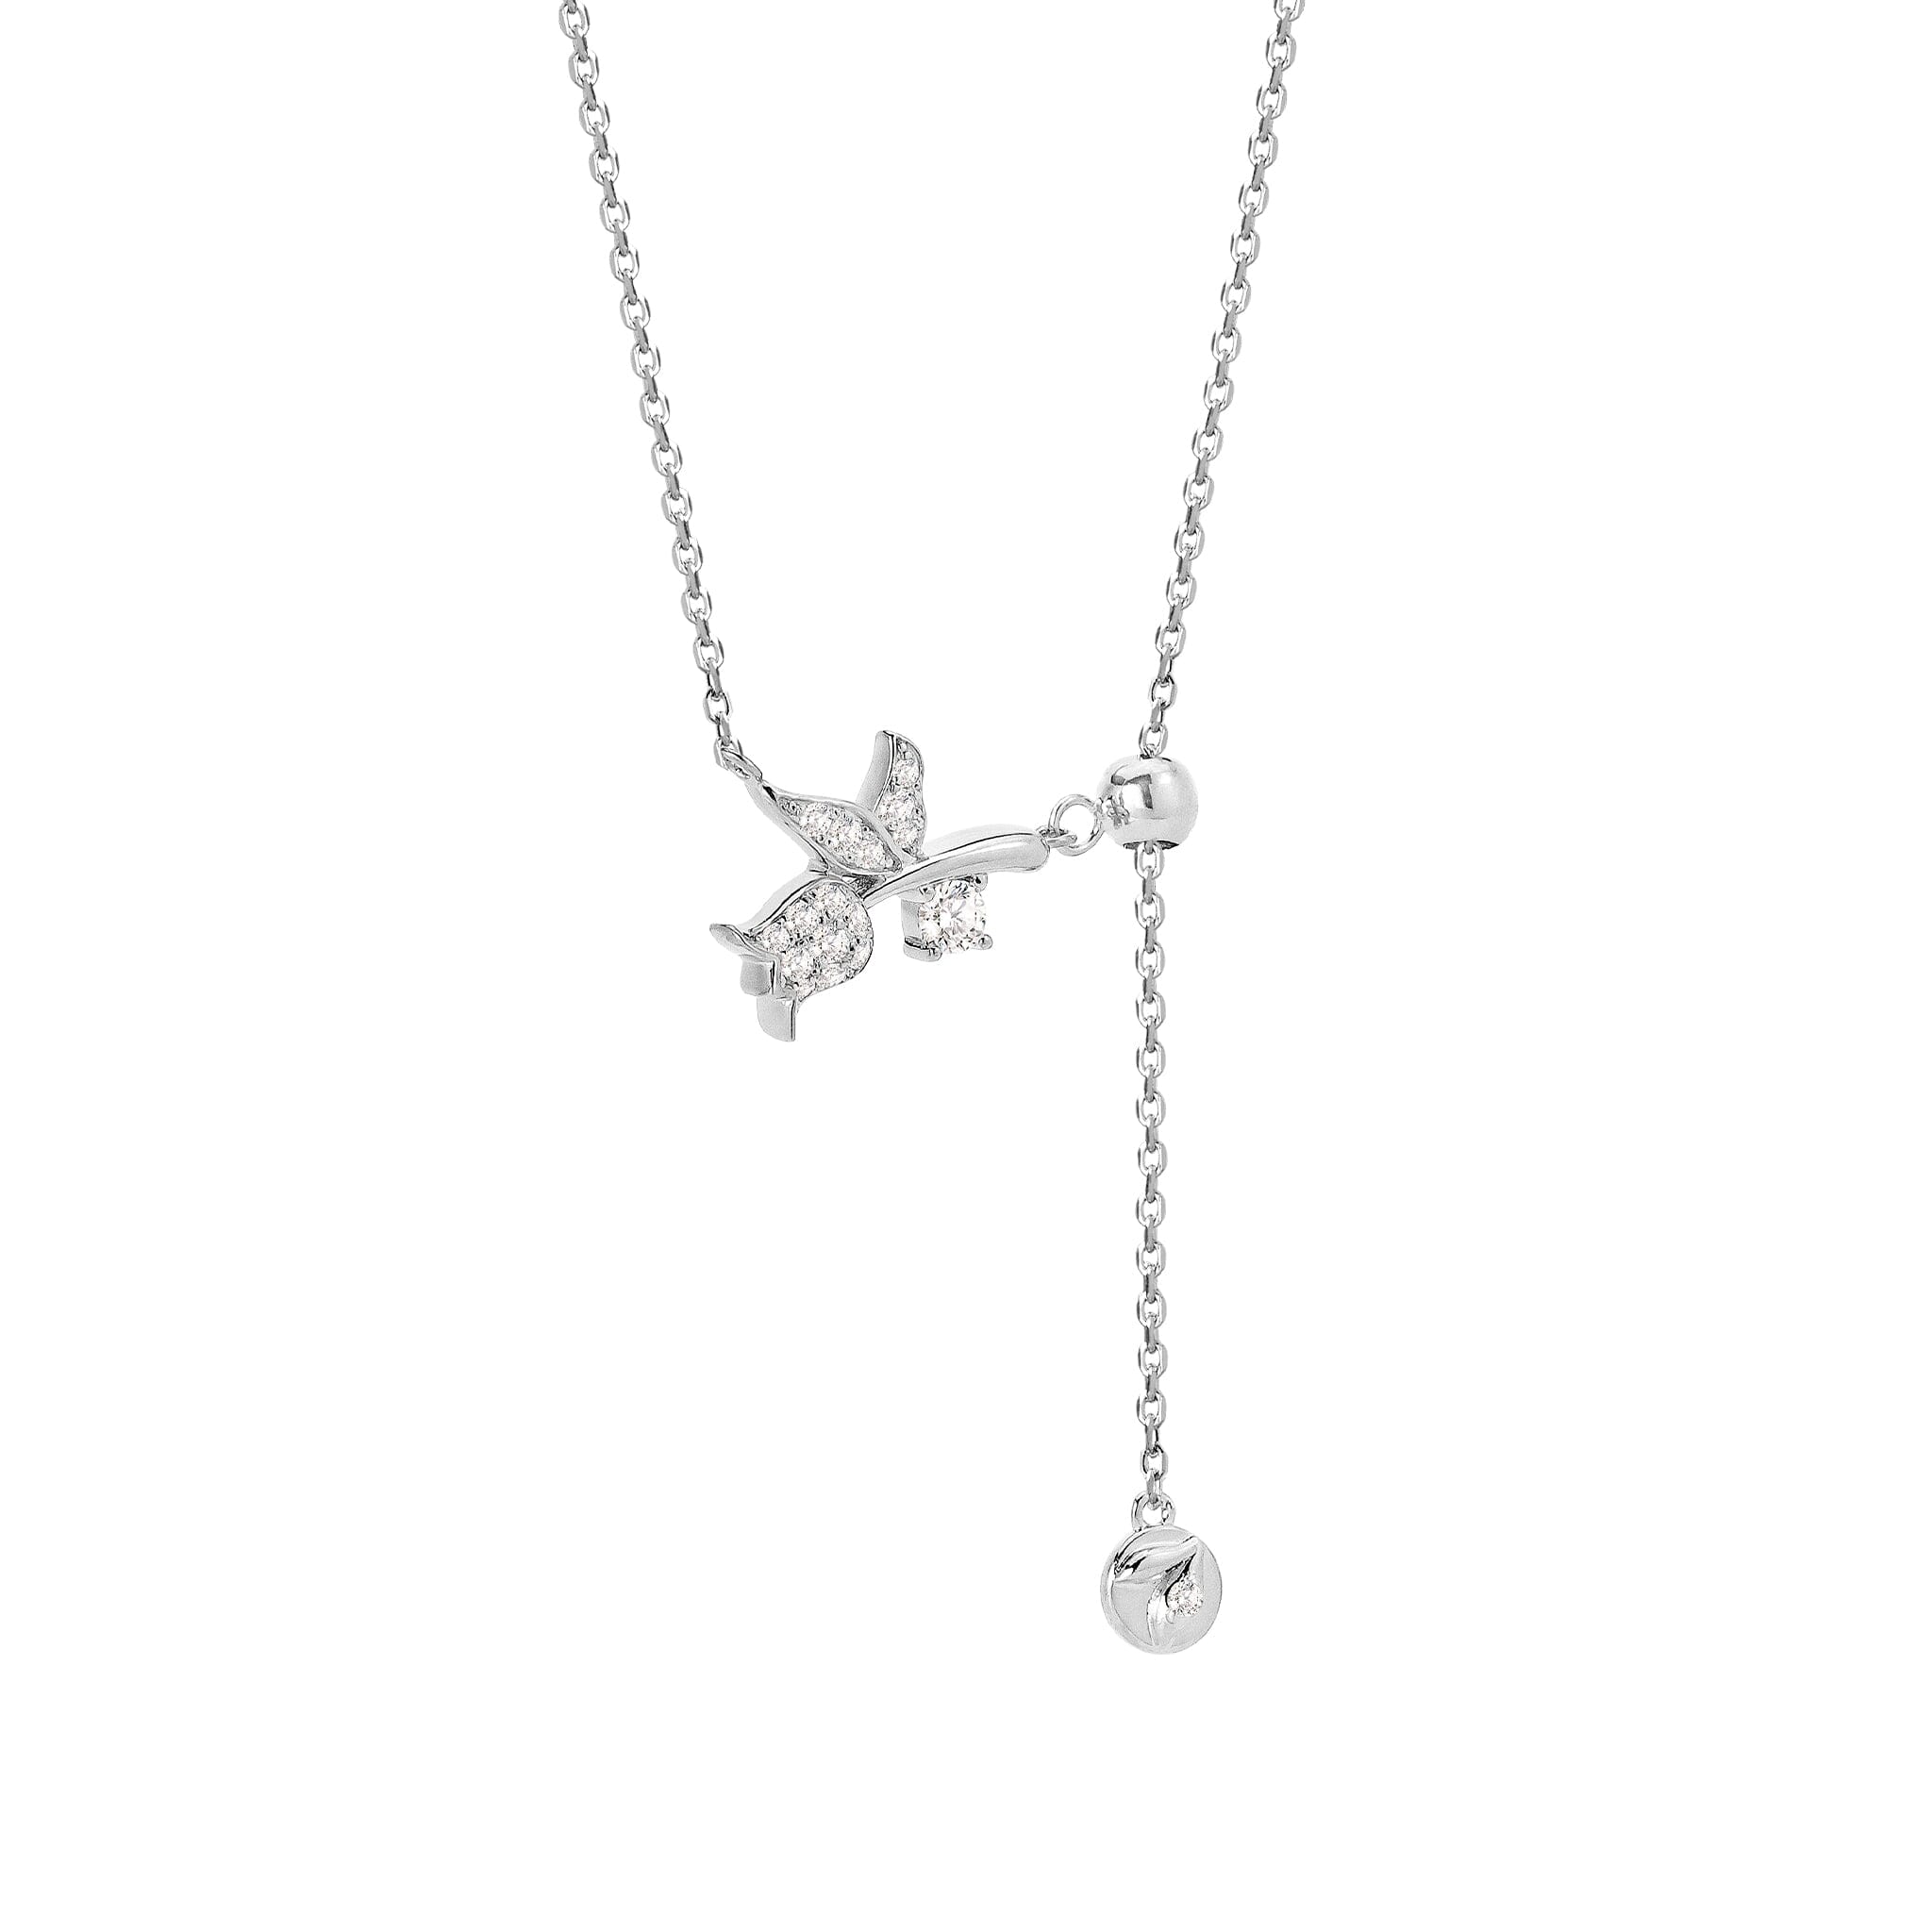 Women's Floral Sterling Silver Necklace Necklaces WAA FASHION GROUP Silver Adjustable 